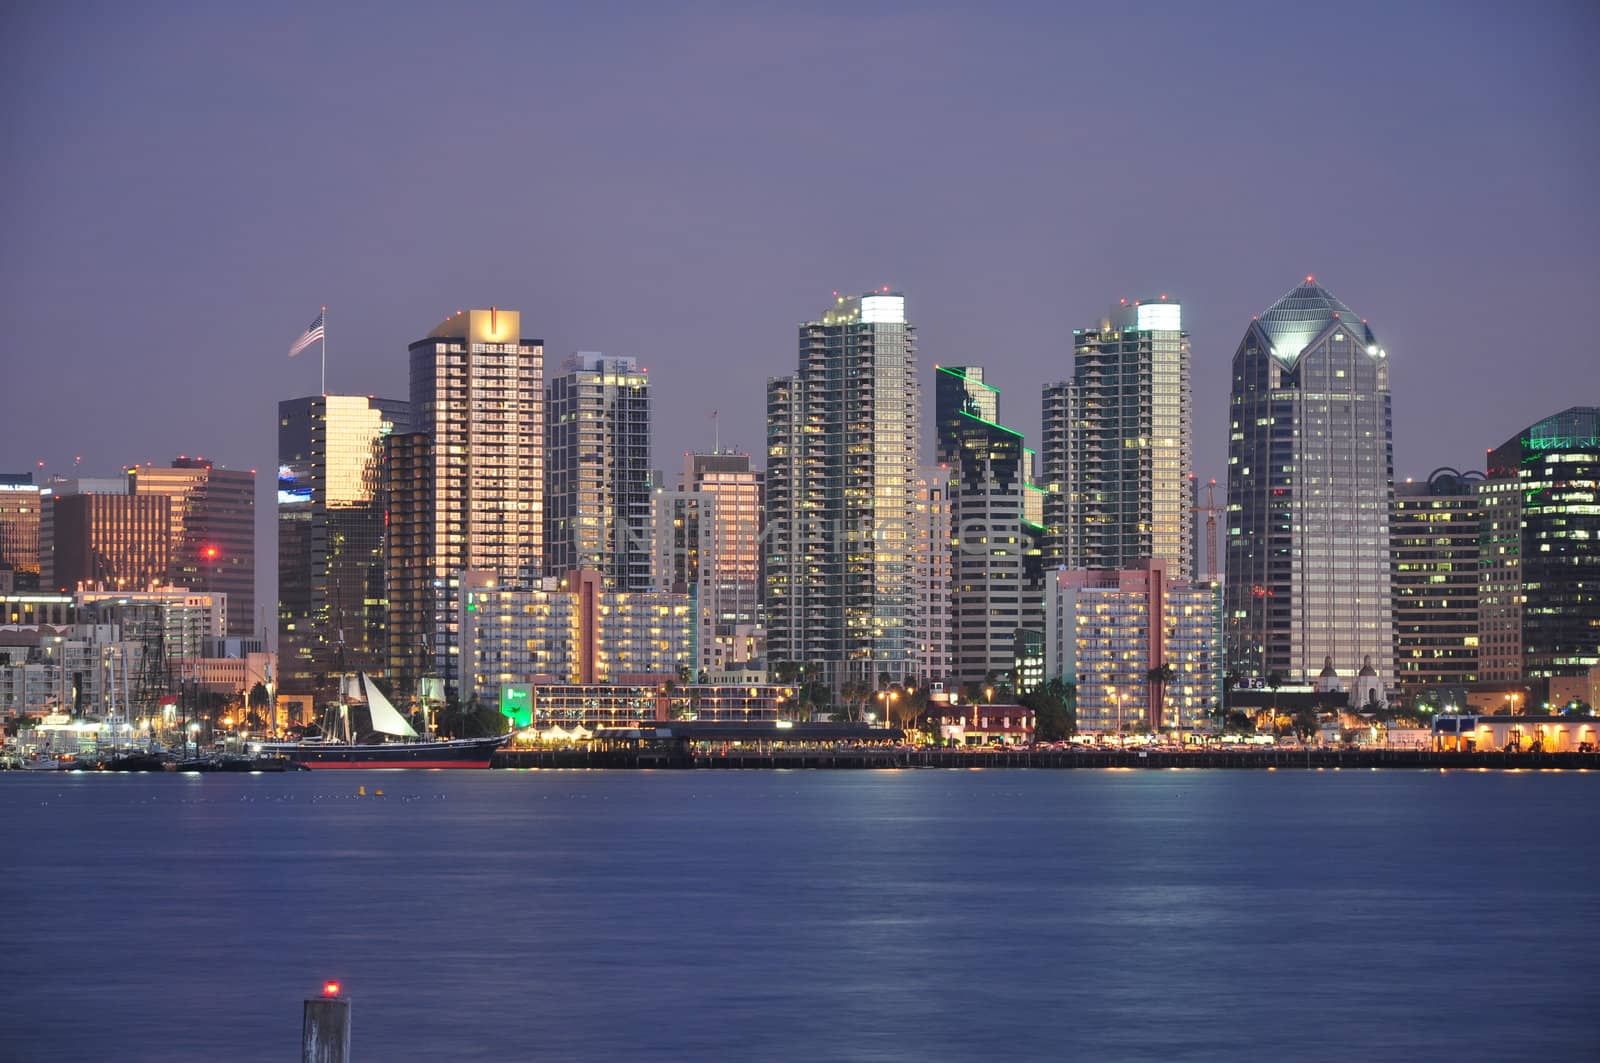 The downtown San Diego, California skyline is seen from Harbor Island at dusk.